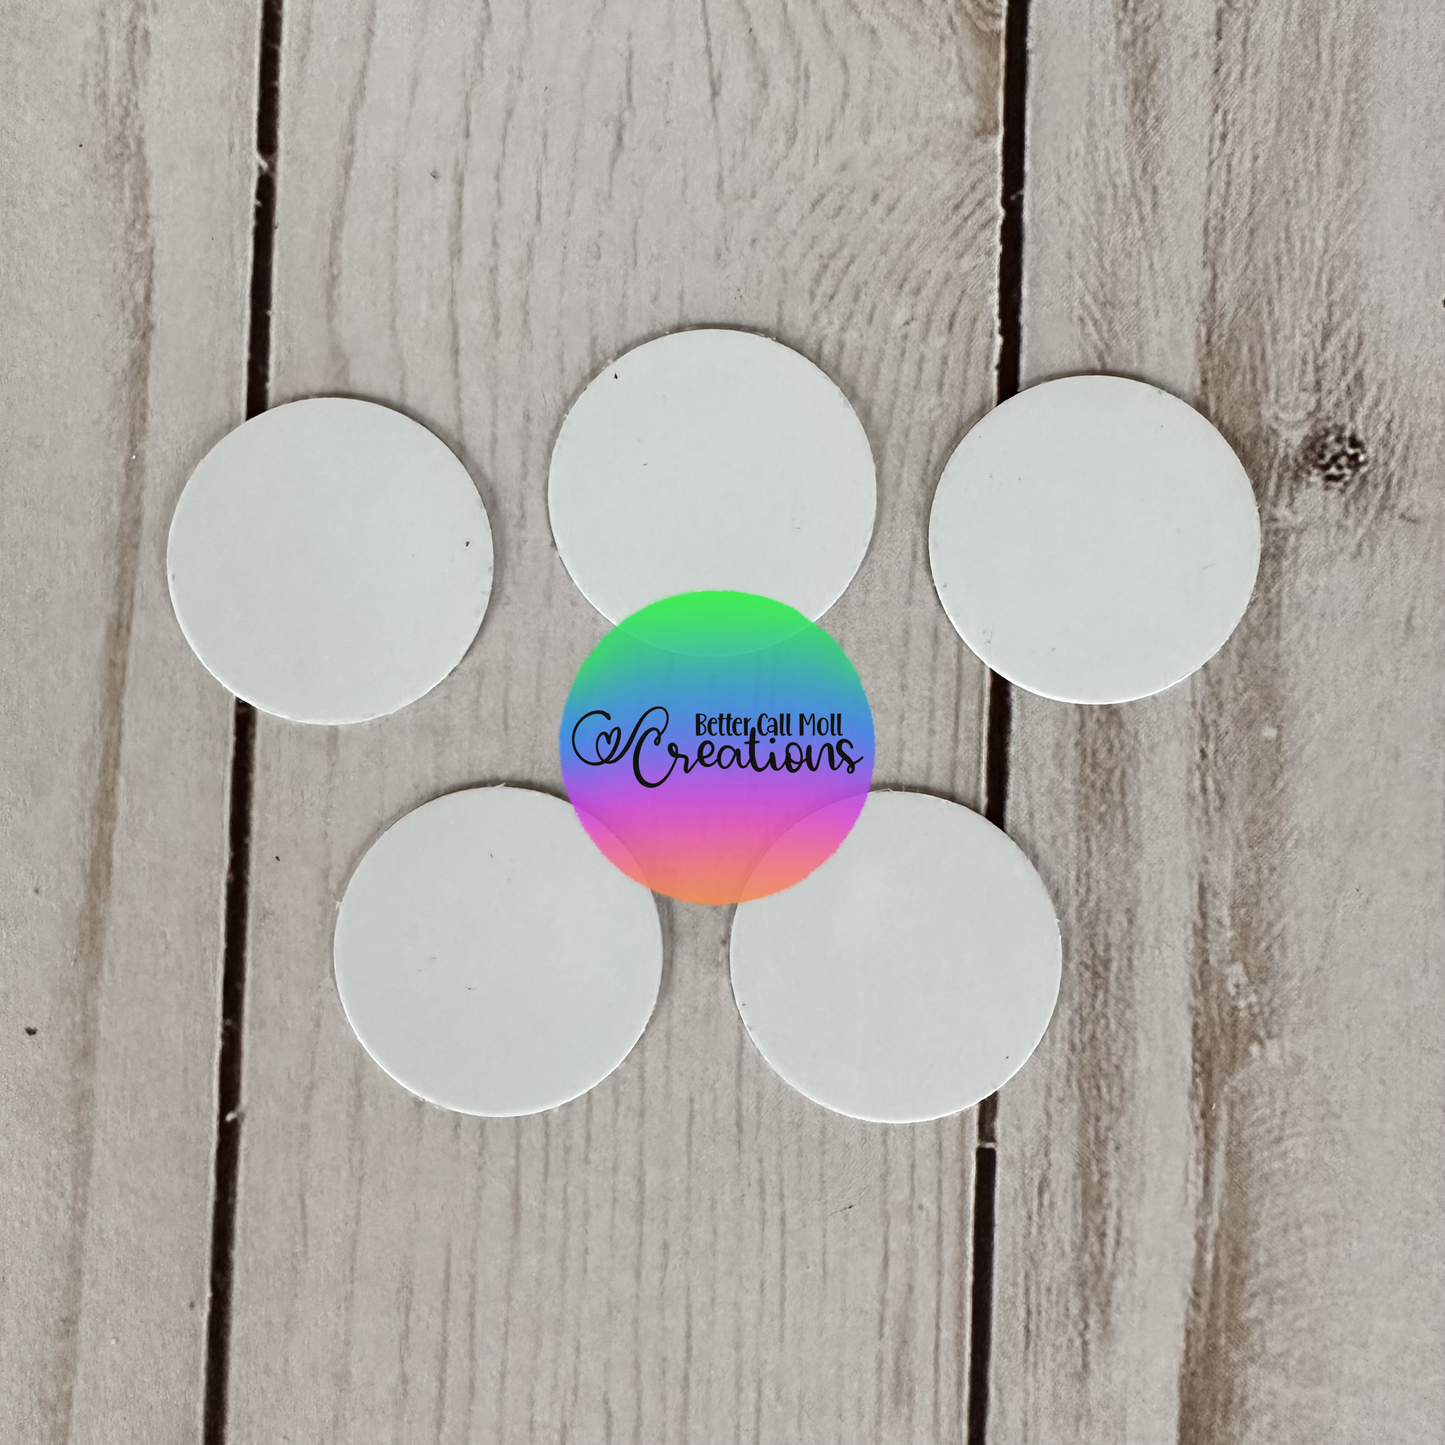 Replacement Insert Disc for Sublimation Badge Reels